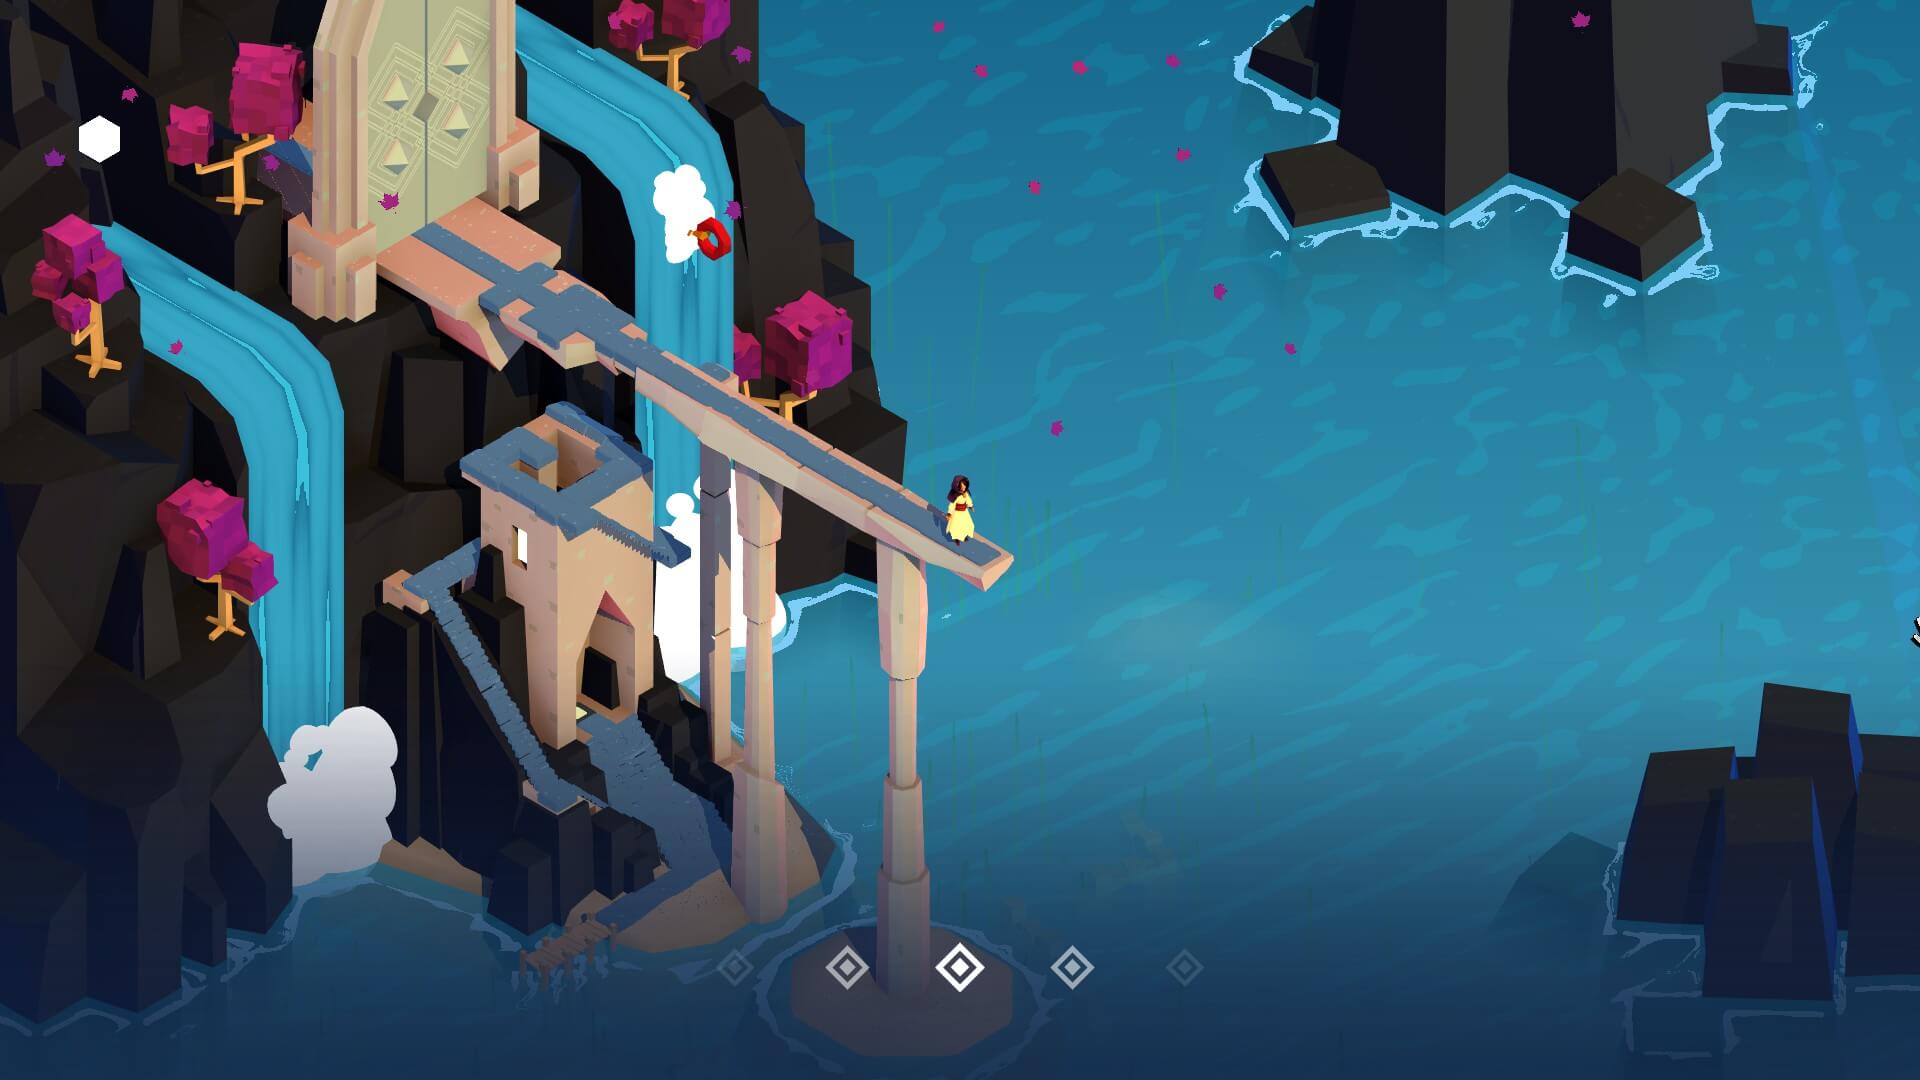 The female character stands at the end of a long pier, surrounded by water. She stands alone in front of a locked gate that the player has to unlock.